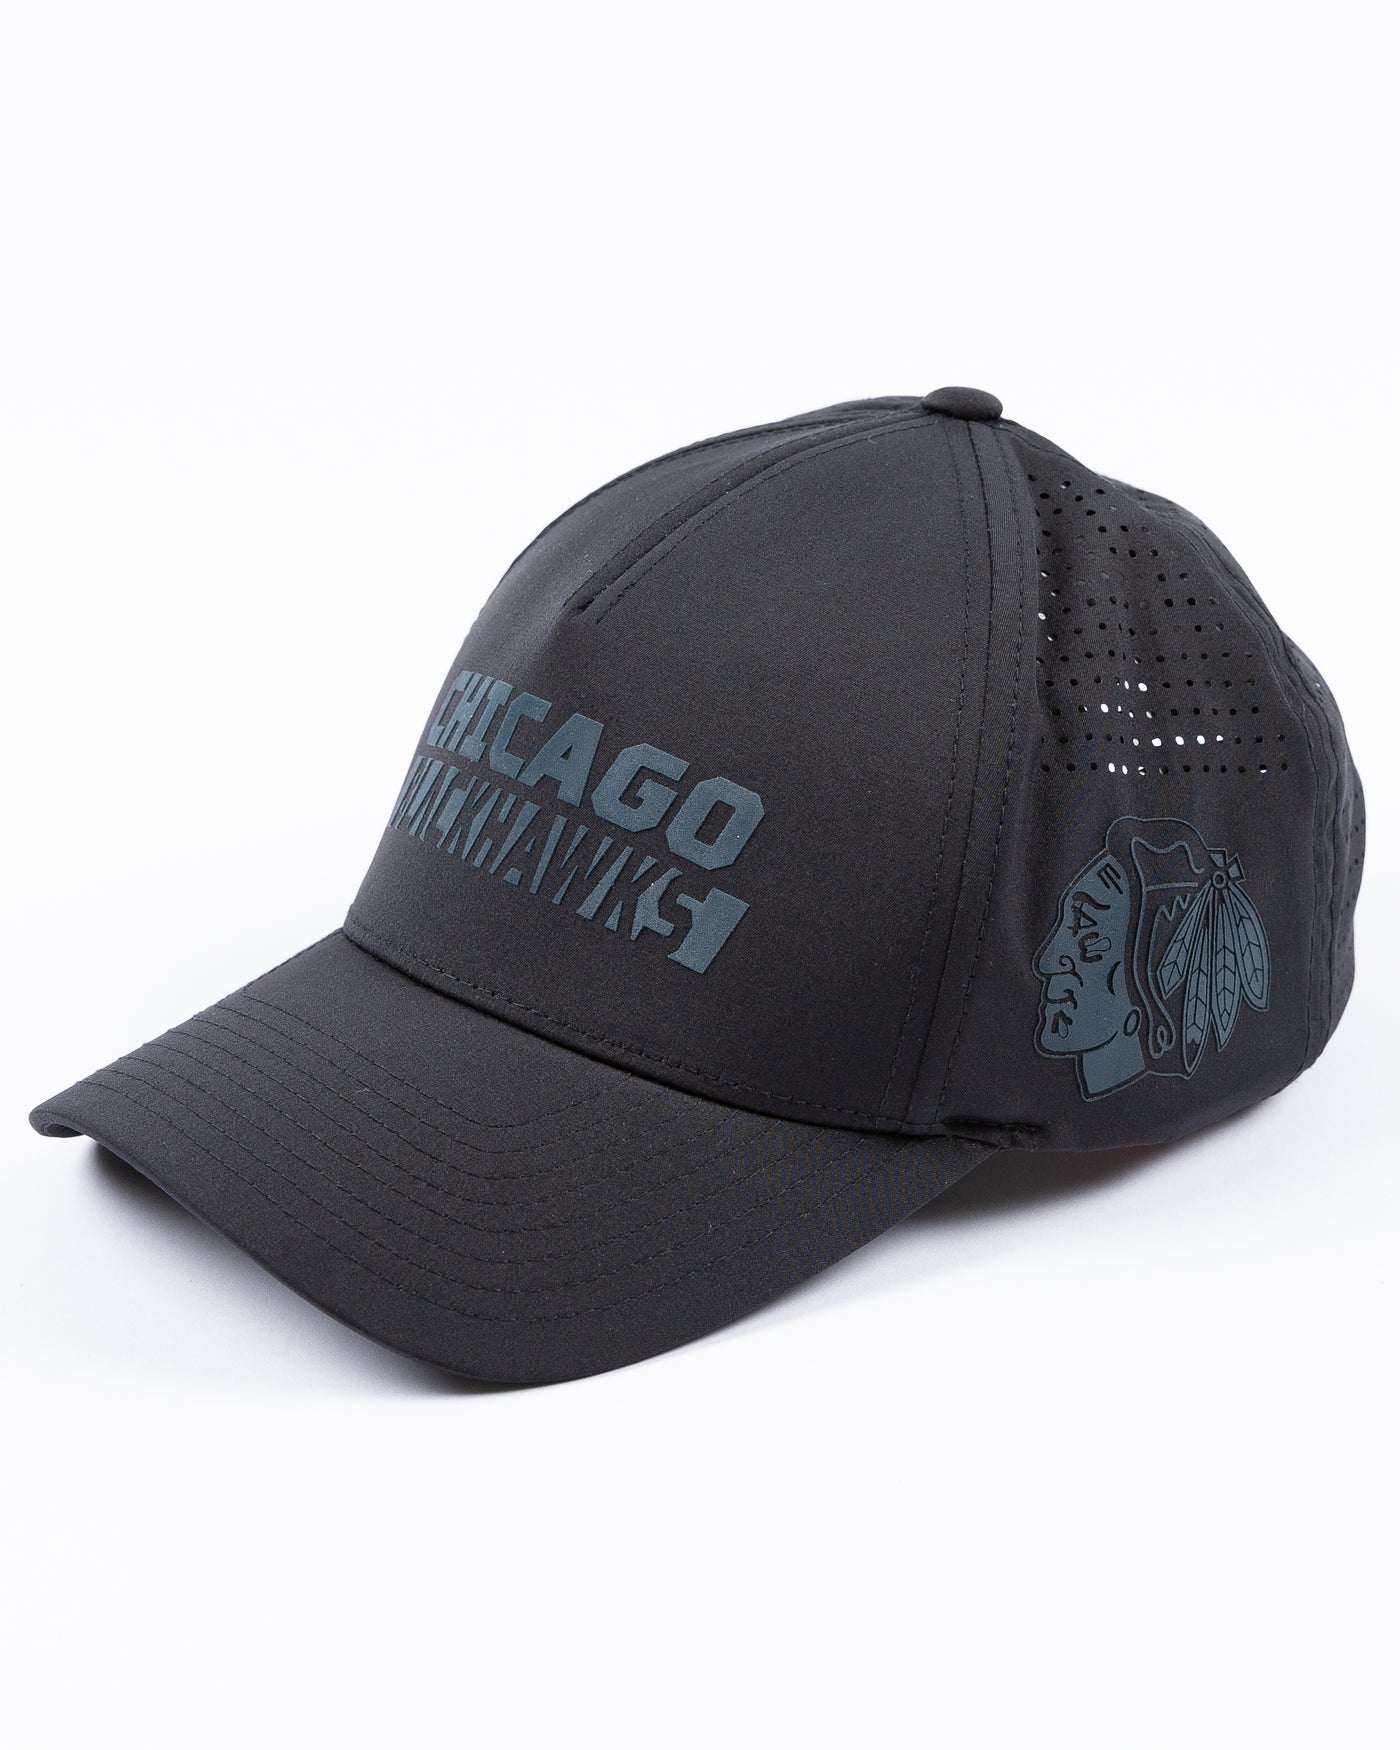 black CCM adjustable lightweight breathable cap with Chicago Blackhawks wordmark on front and tonal primary logo on left side - left angle lay flat